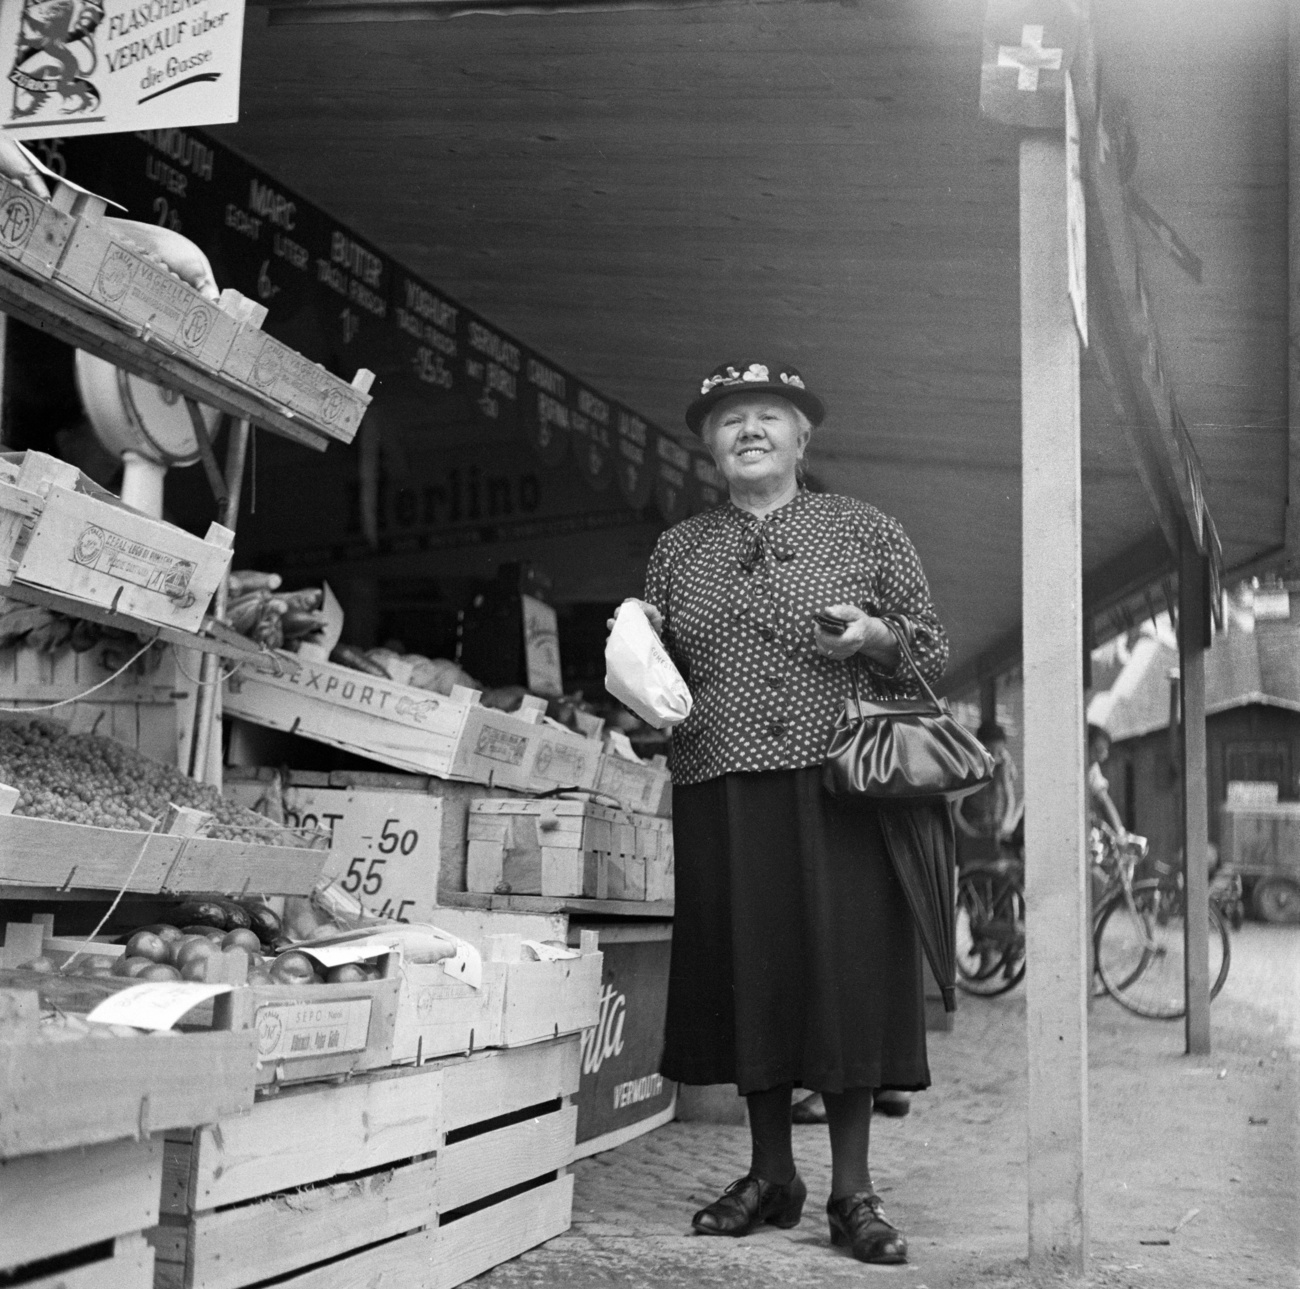 Woman at a vegetable stand